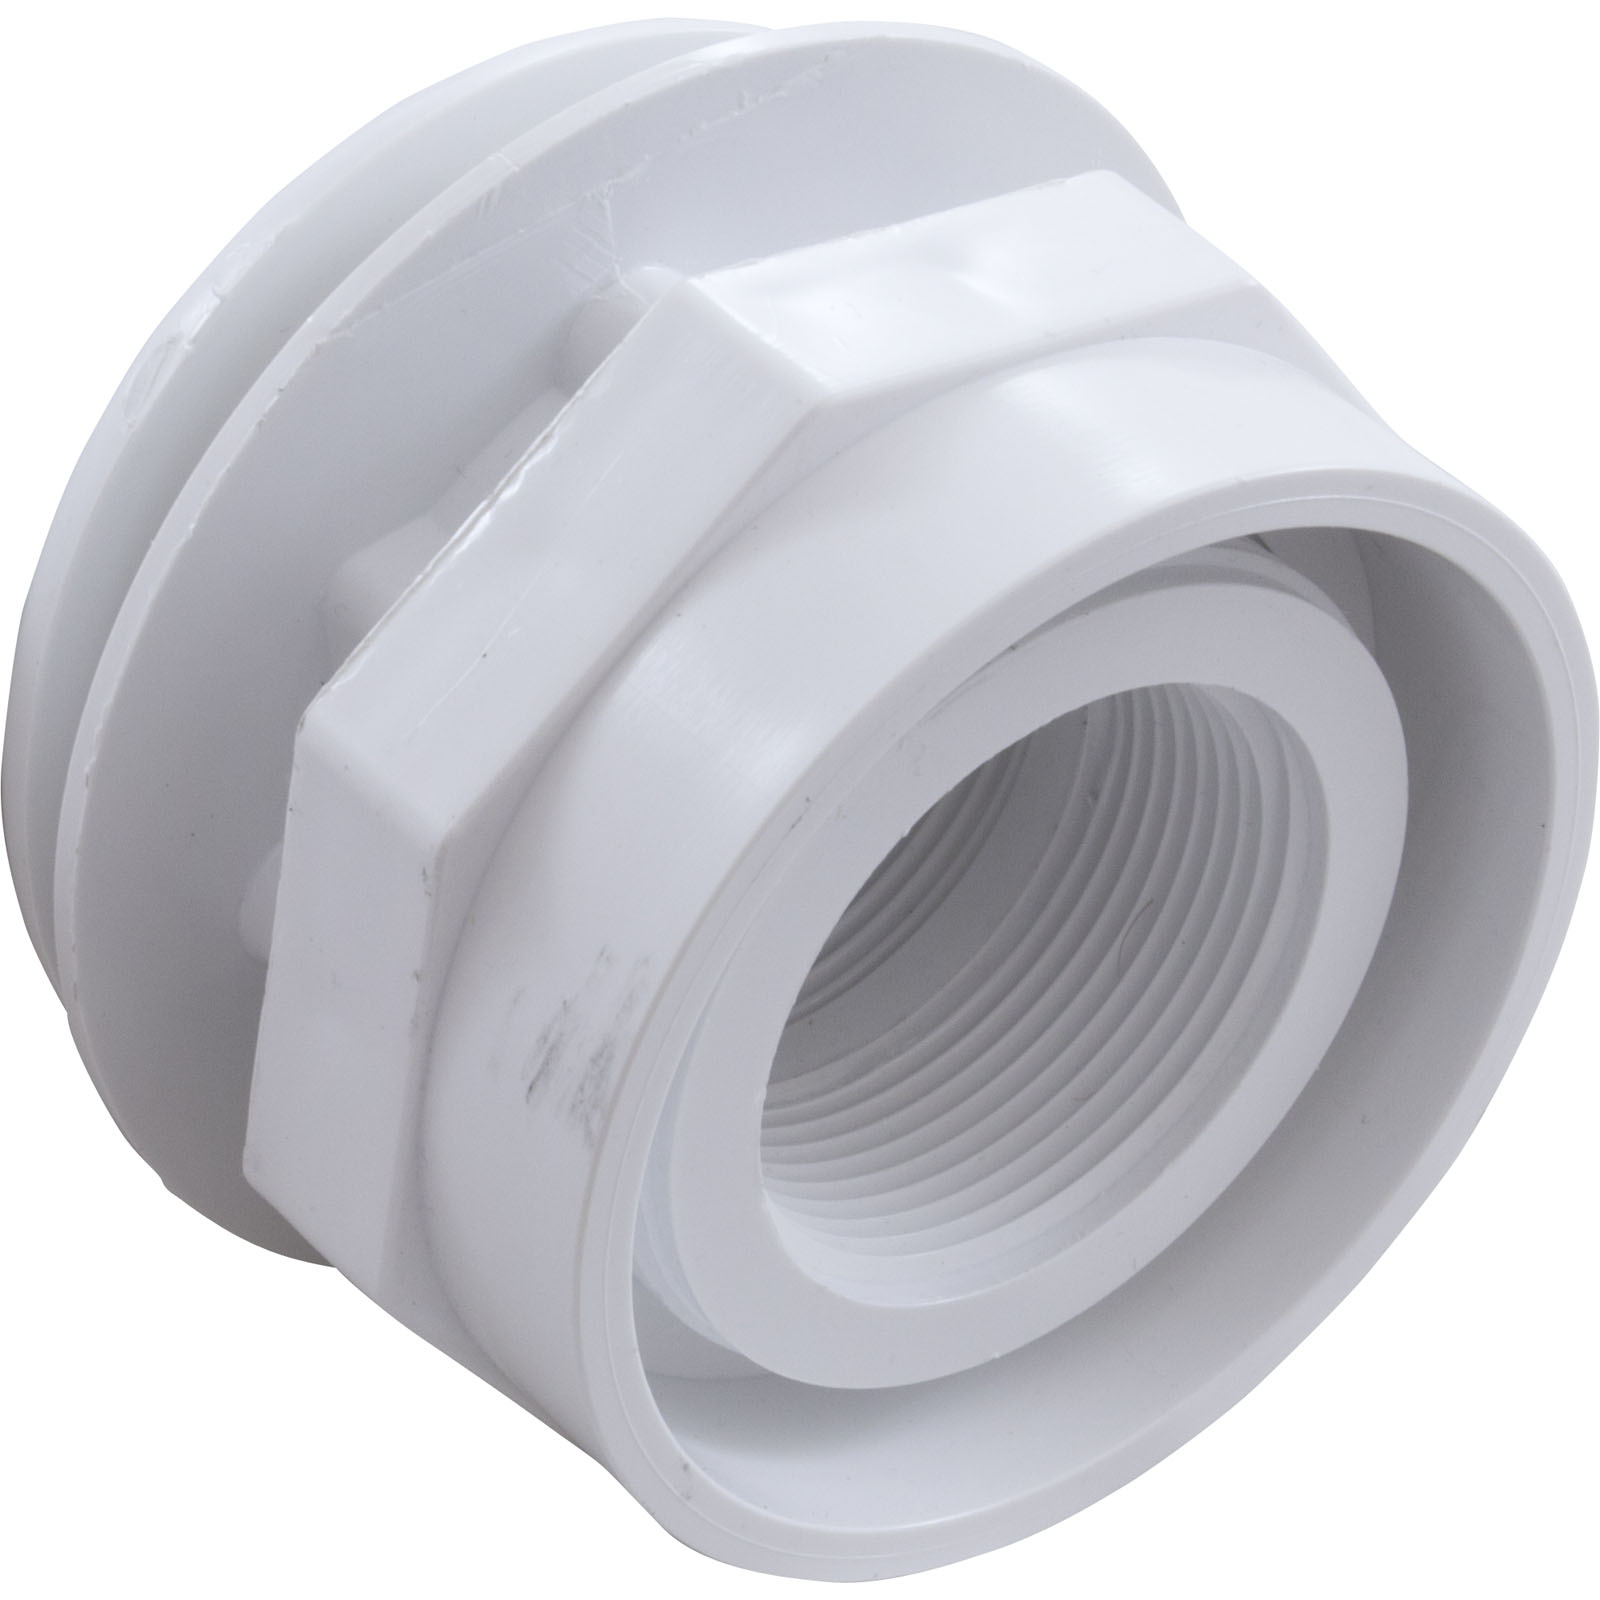 Picture of 400-9160B Wall Fitting WW Vinyl Liner 3"hs 1-1/2"fpt 3-1/2"fdWht